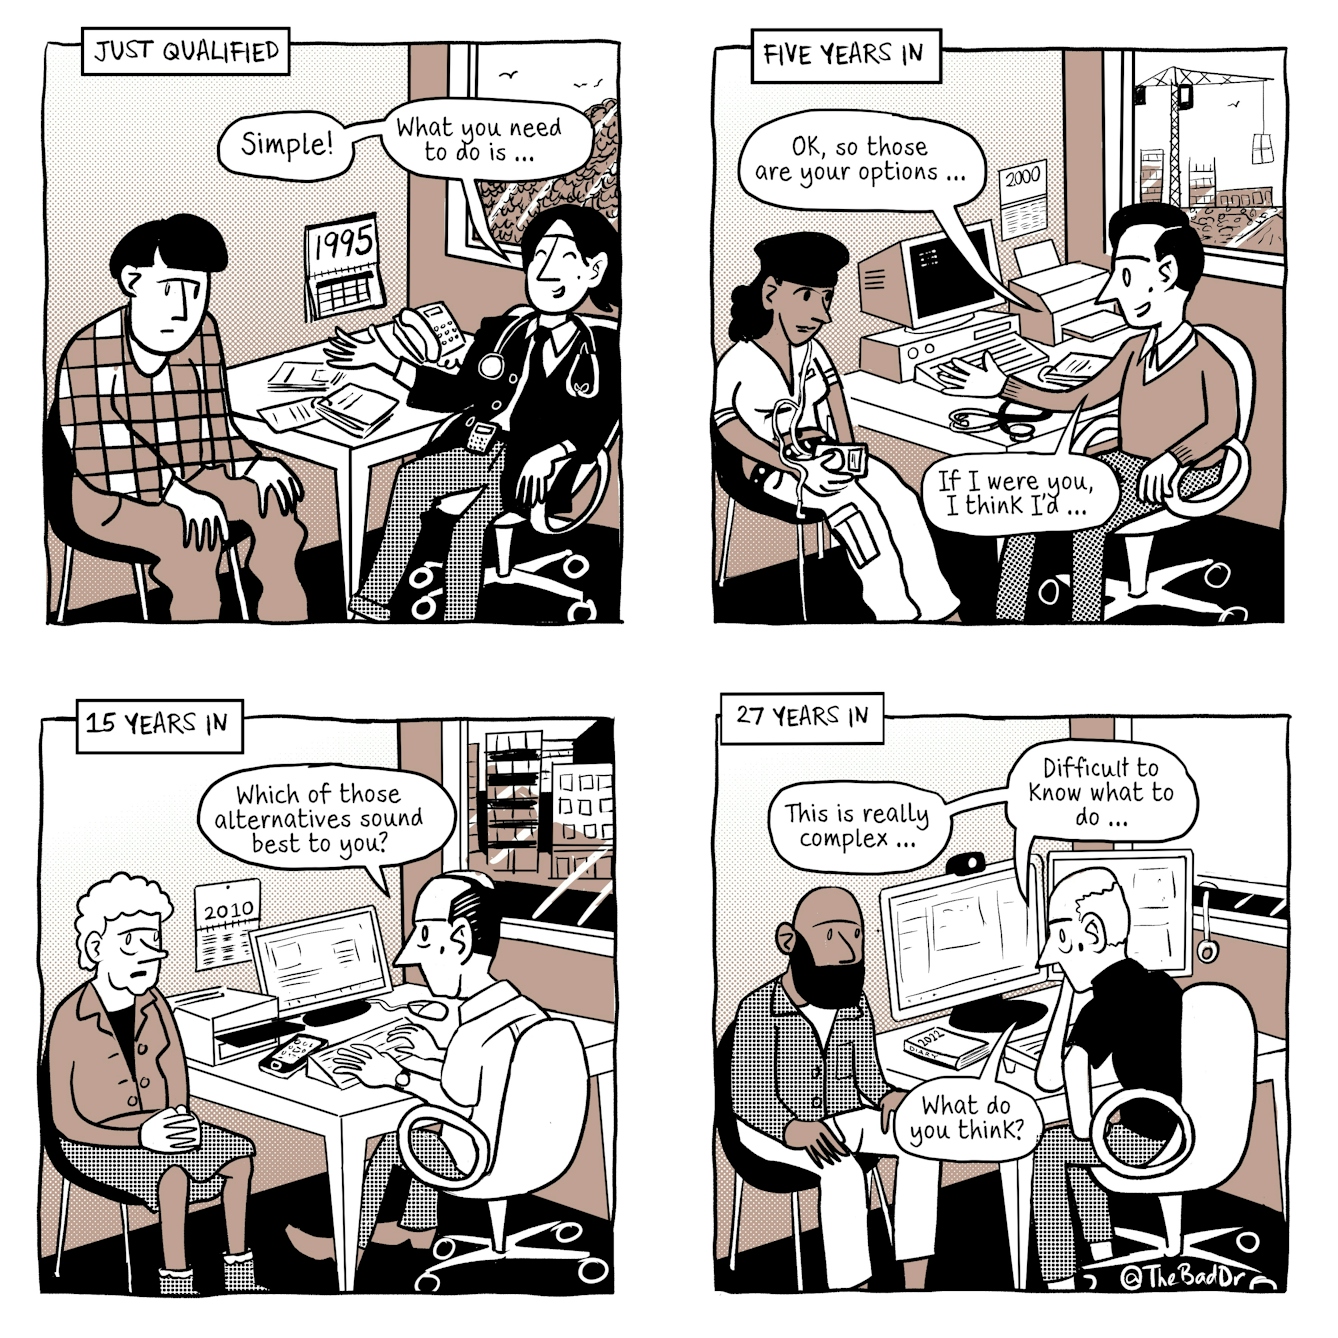 A four panel comic in black and white with a light brown accent tone. 

The first panel is titled 'just qualified' and shows a young male GP reclining at his consultation desk, hand outstretched to a forlorn looking patient. The GP is saying, 'Simple! What you need to do is...'. On his desk is a large desk phone and papers. The calendar on the wall shows the year 1995. The window behind the GP shows foliage and birds flying.

The second panel is titled 'five years in' and shows the same slightly older GP sitting upright at his consultation desk, hand outstretched to a hunched over patient. The GP is saying, 'OK, so these are your options...'. On his desk is a large desktop computer and printer. The calendar on the wall shows the year 2000. Out of the window behind the GP is a large crane and large high rise buildings being constructed. 

The third panel is titled '15 years in' and shows the same  GP with less hair sitting at his consultation desk, hands poised over his keyboard. The GP is saying to his elder patient, 'Which of those alternatives sound good to you?'. On his desk is a small computer screen and smartphone. The calendar on the wall shows the year 2010. Out of the window behind the GP the finished building development can be seen. 

The forth and final panel is titled '27 years in' and shows the same  GP with even less hair which is now white, hunched over his consultation desk, chin resting on his hand. The GP is saying to his patient, 'This is really complex... difficult to know what to do... What do you think?'. On his desk is are two large computer screens with a webcam. The paper diary on the desk shows the year 2022. The blind is pulled down on the window behind him and it looks like night time outside.